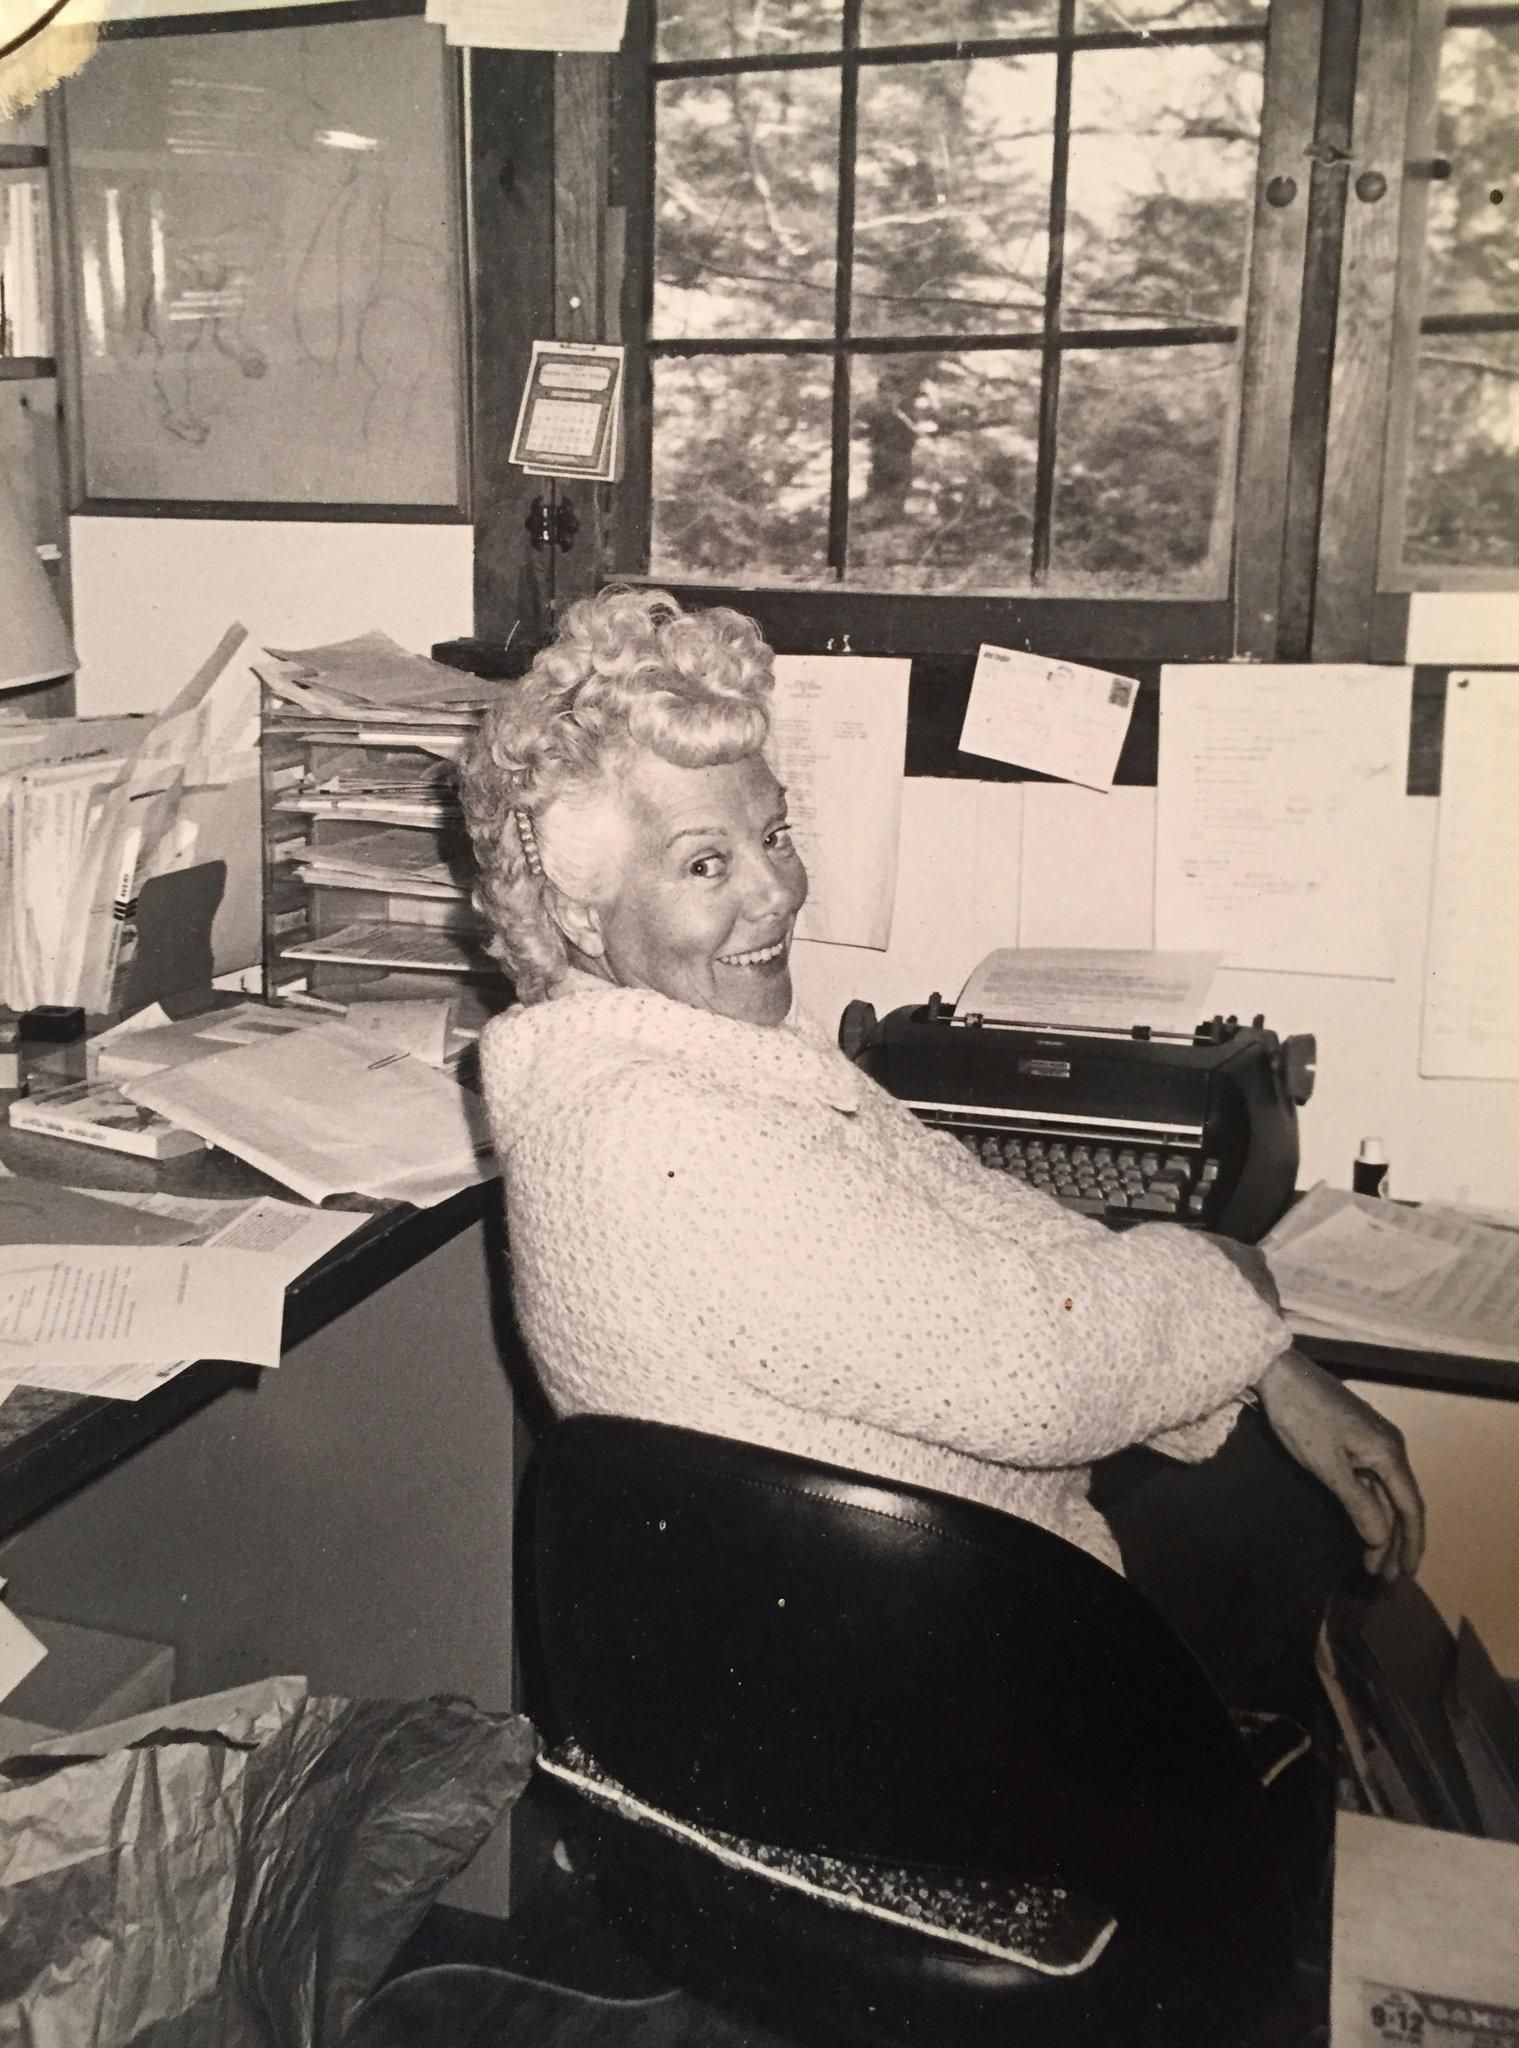 Publisher Betty Ballantine--she believed in the power of ideas, and was willing to take risks to bring new ones to light. (Photo: Richard Ballantine/Kathy Ballantine 1980, via Associated Press)